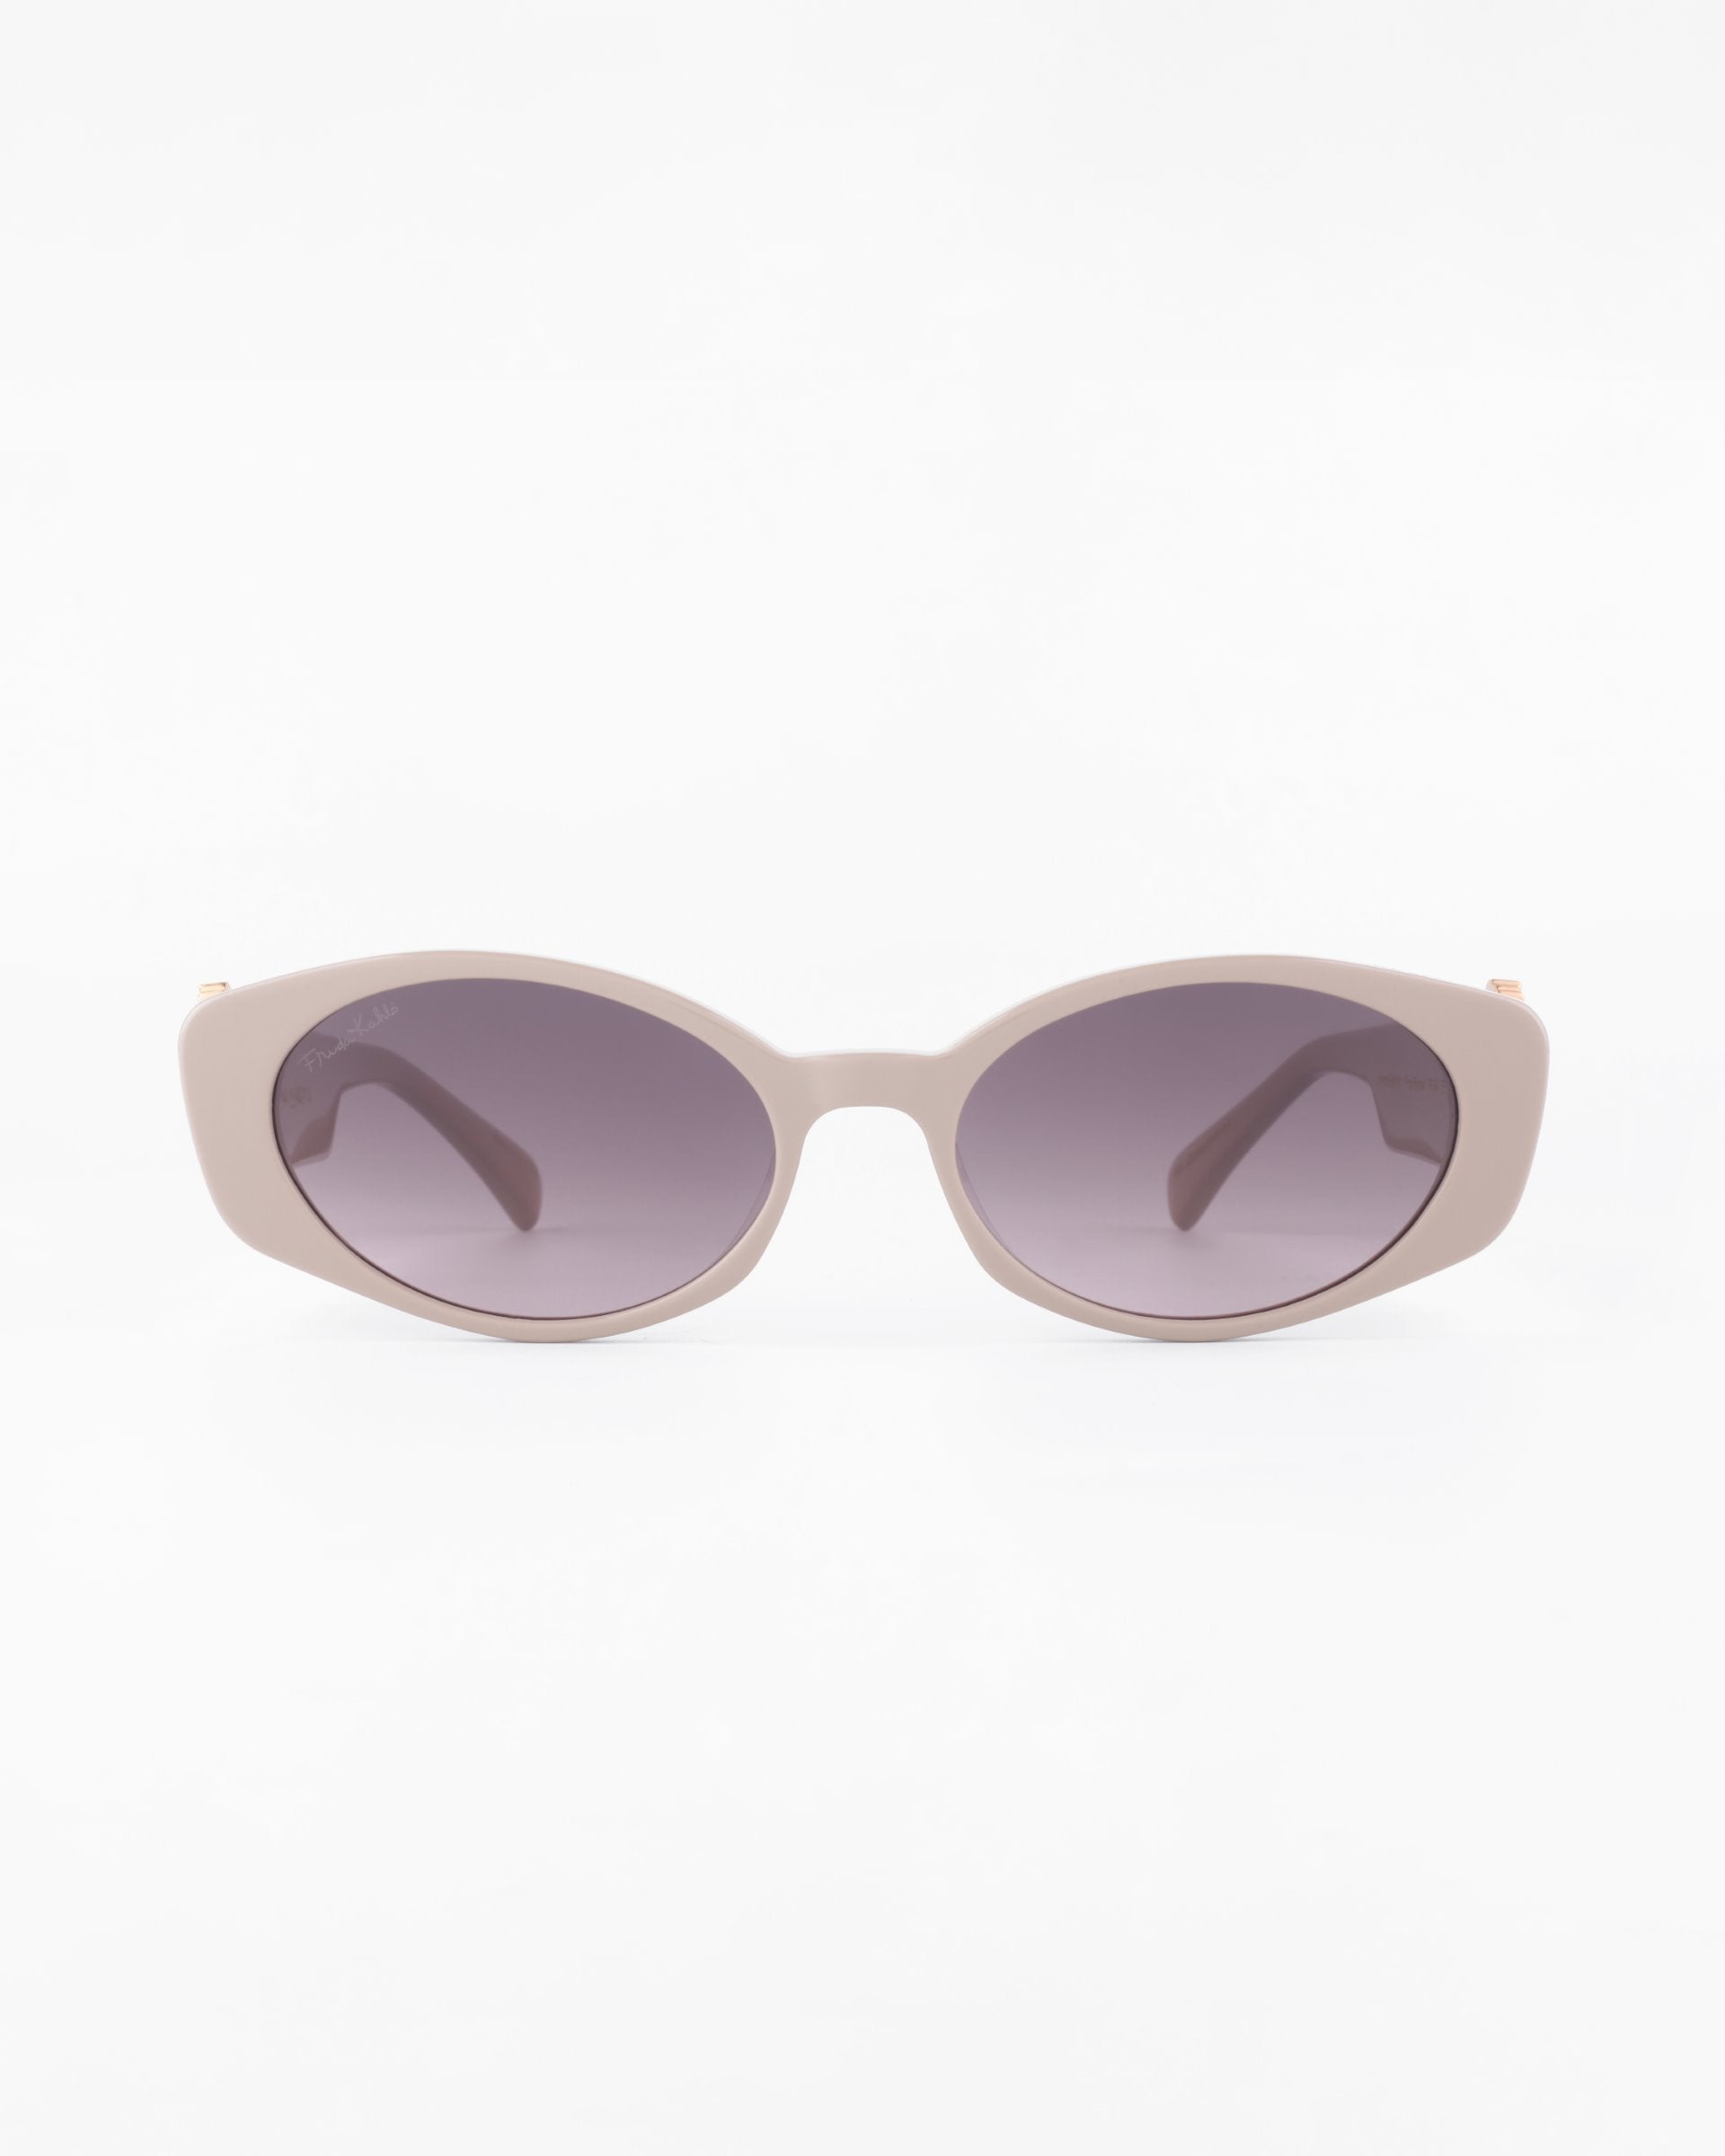 A pair of Frida Portrait sunglasses by For Art&#39;s Sake® with large, round, ultra-lightweight nylon lenses tinted in a gradient from dark to light gray. The sunglasses offer 100% UVA &amp; UVB protection and are positioned facing forward against a plain white background.